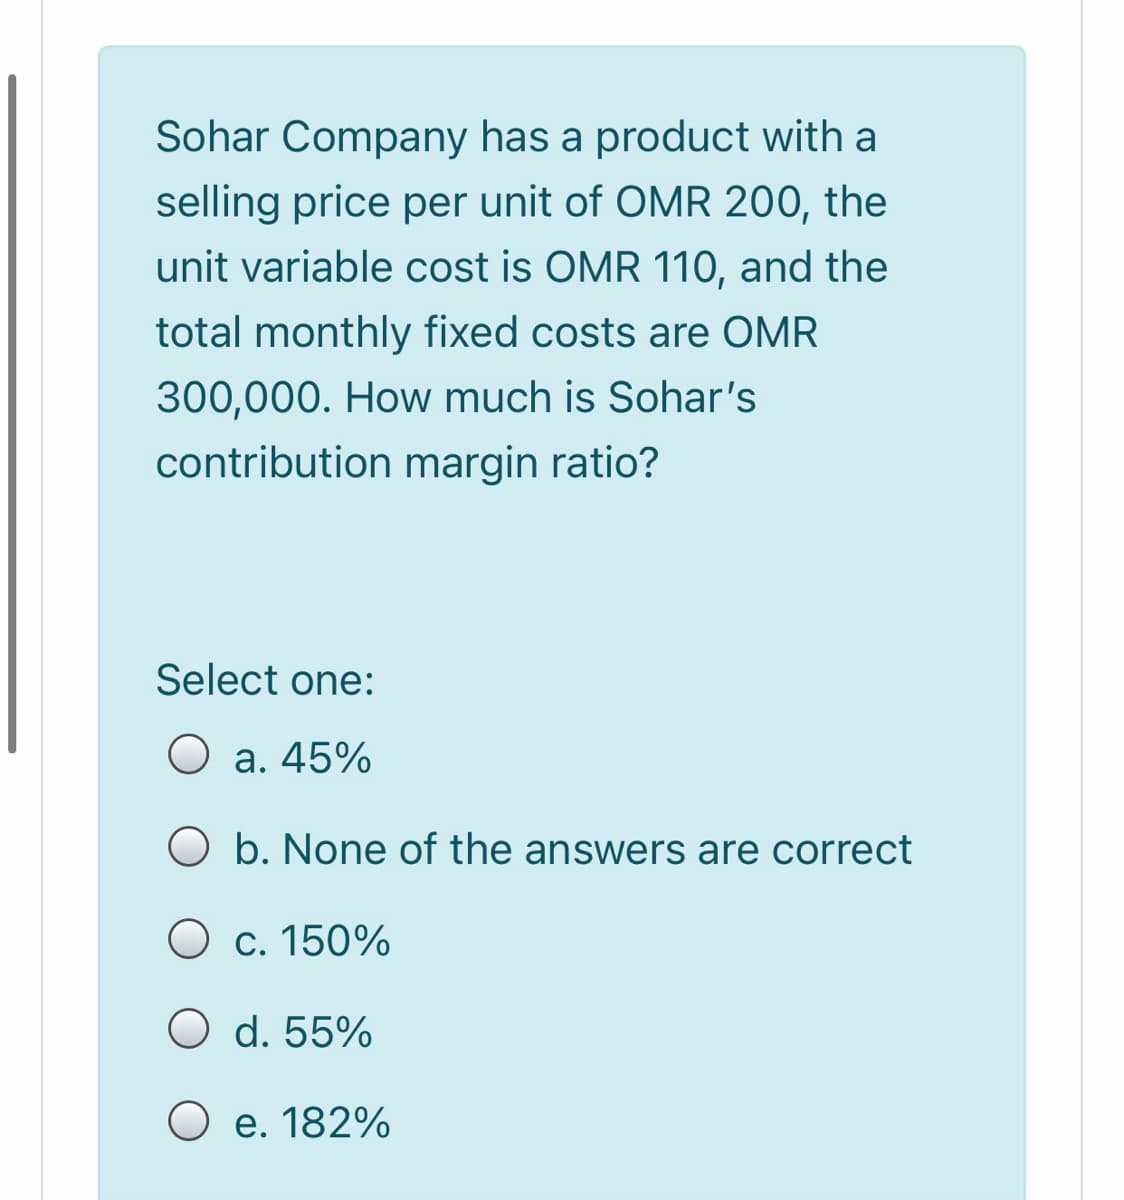 Sohar Company has a product with a
selling price per unit of OMR 200, the
unit variable cost is OMR 110, and the
total monthly fixed costs are OMR
300,000. How much is Sohar's
contribution margin ratio?
Select one:
O a. 45%
O b. None of the answers are correct
O c. 150%
O d. 55%
O e. 182%
